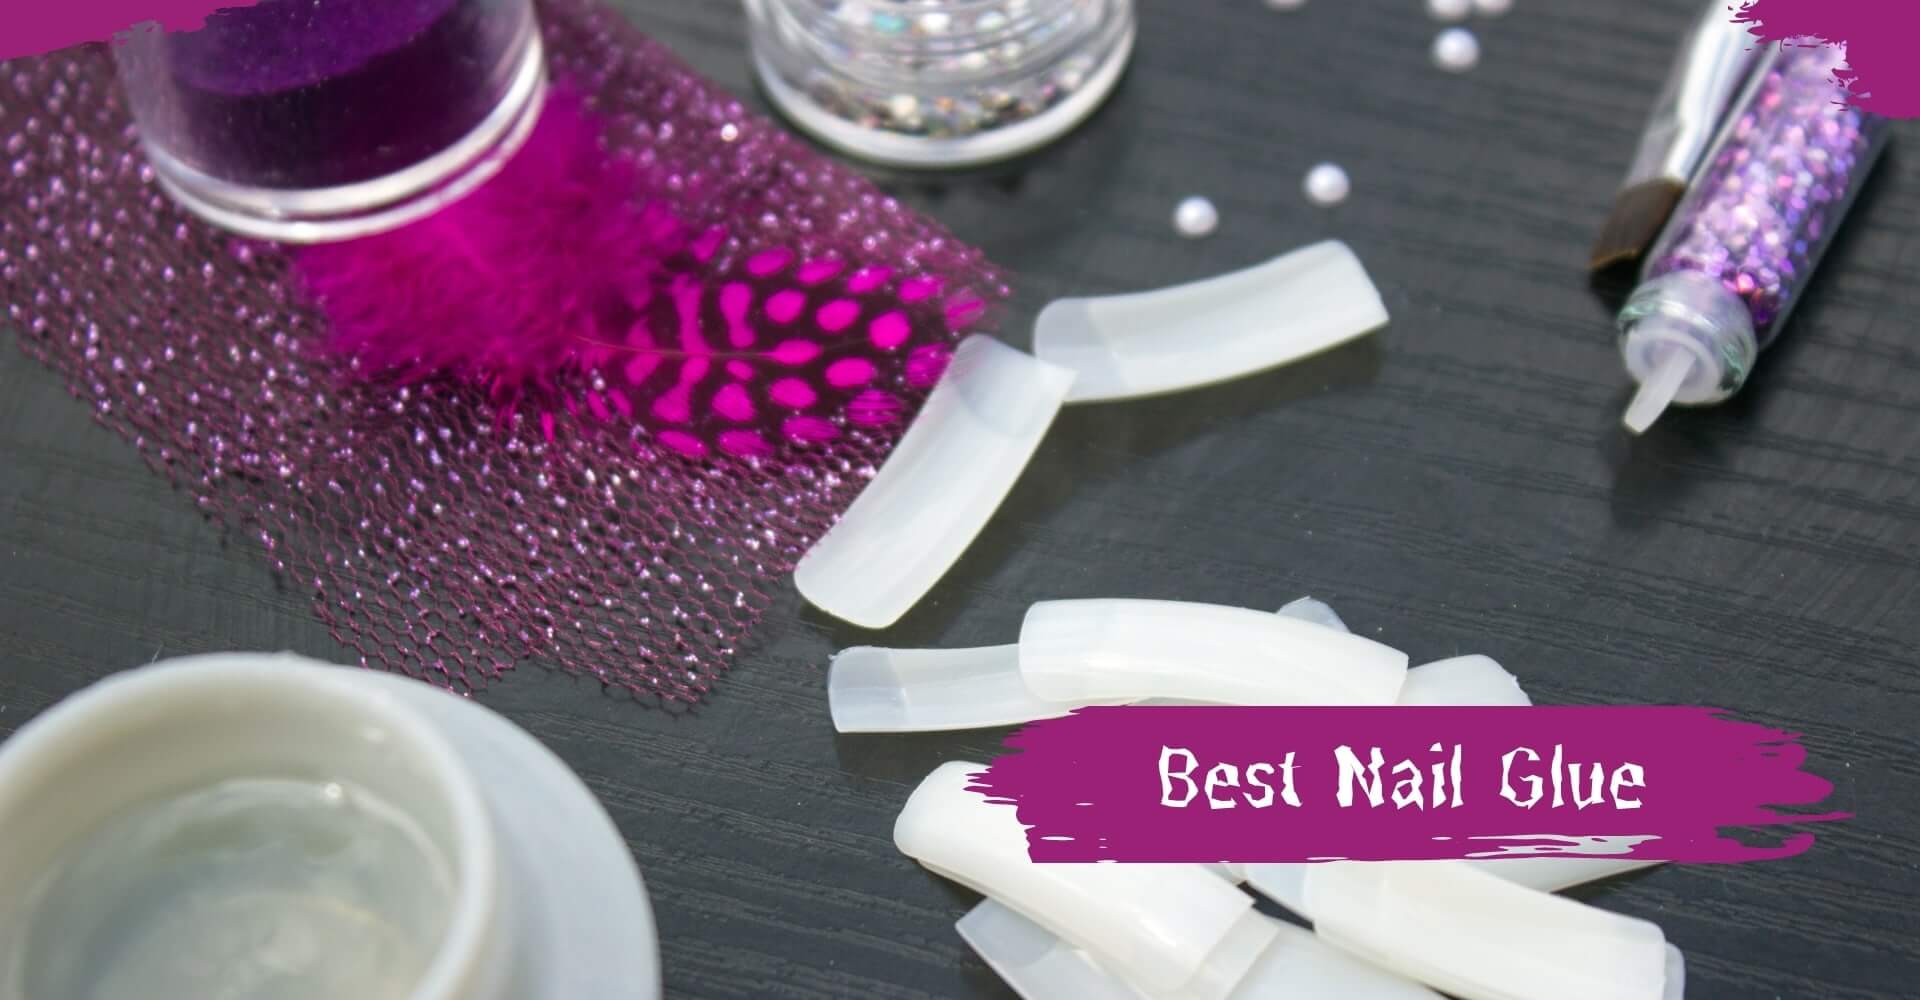 Best Nail Glue for Press on Nails